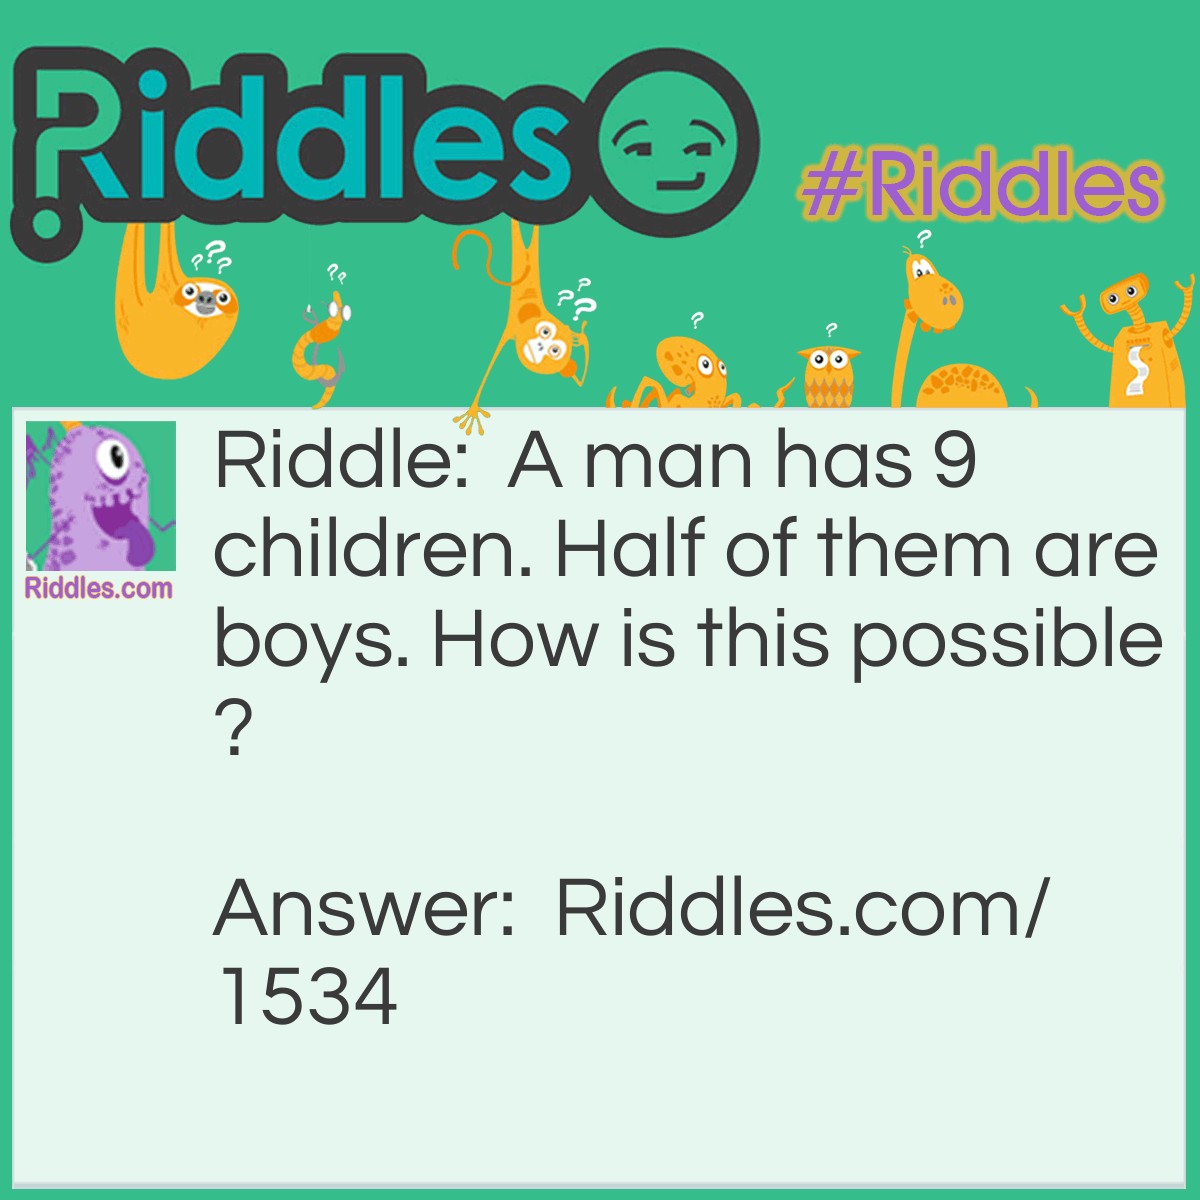 Riddle: A man has 9 children. Half of them are boys. How is this possible?  Answer: they are all boys